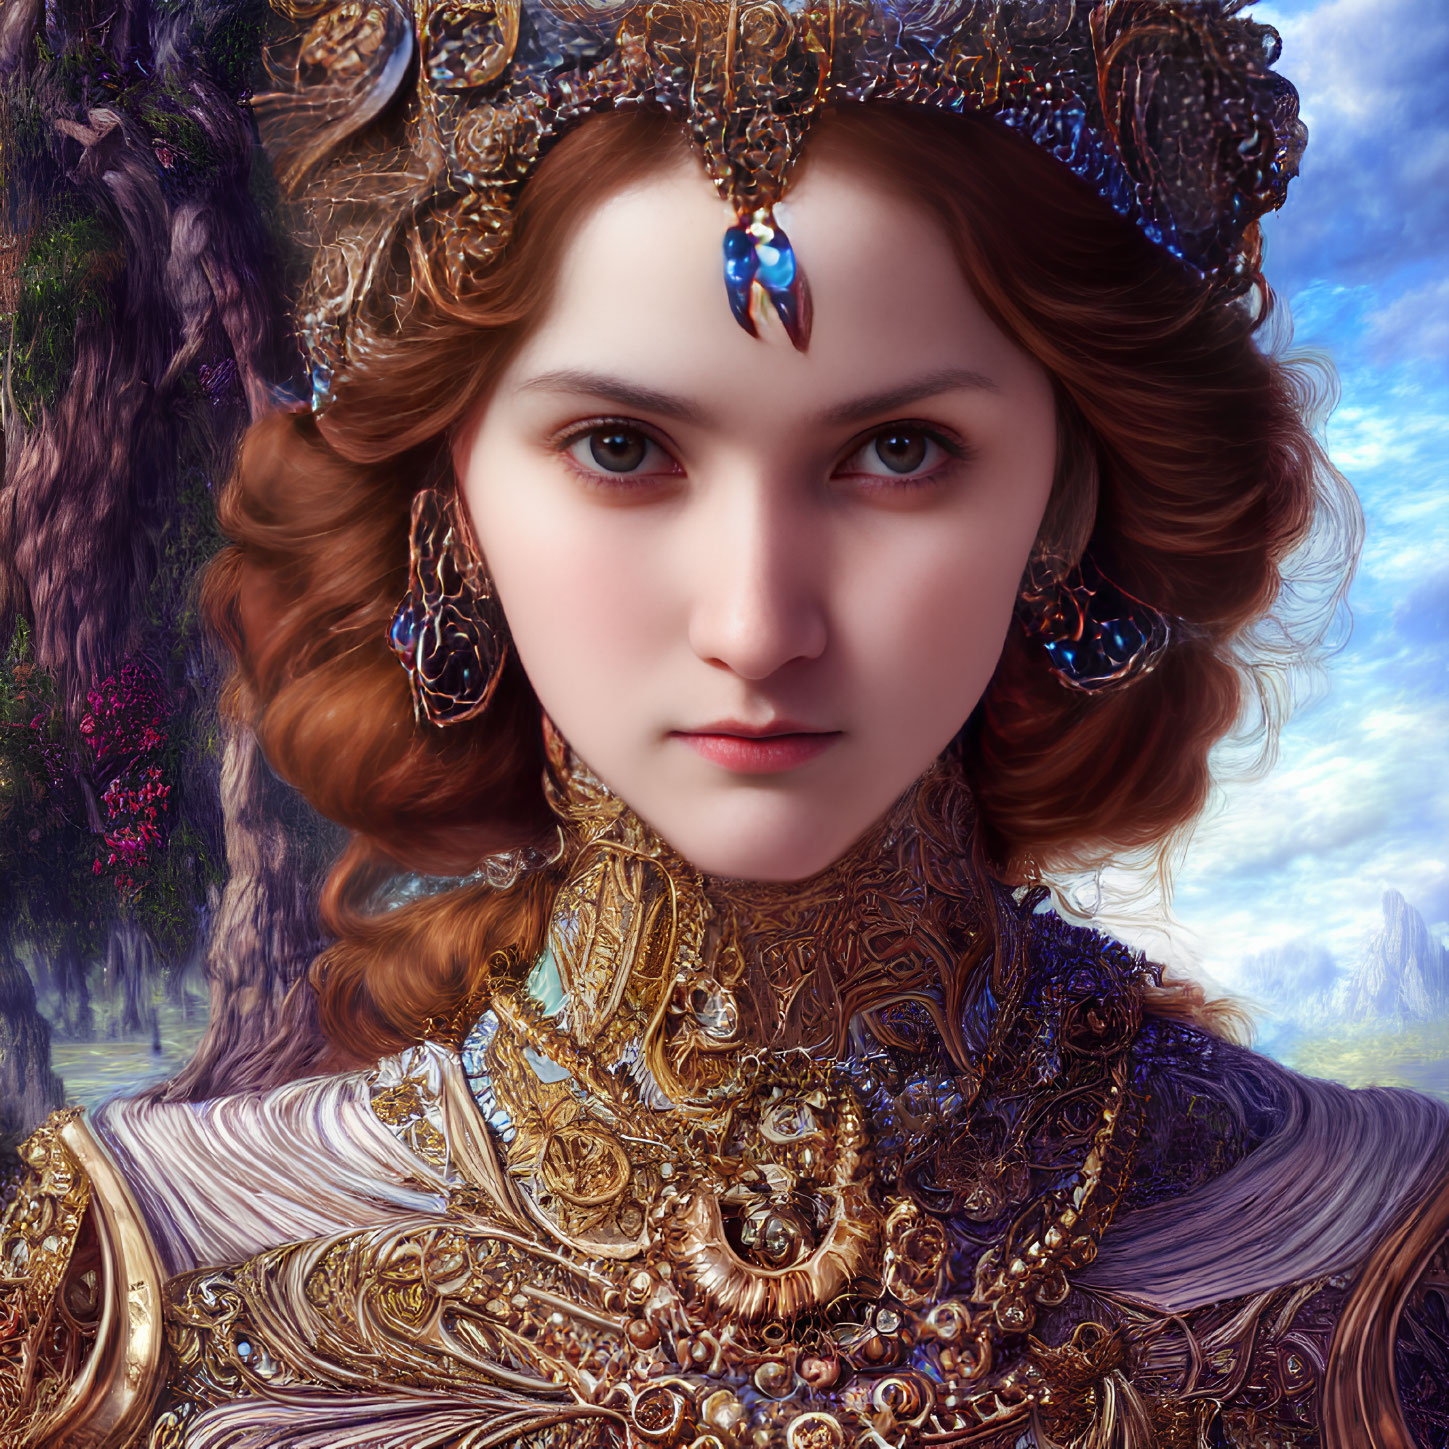 Portrait of Woman with Golden Headgear and Intense Eyes in Fantastical Forest